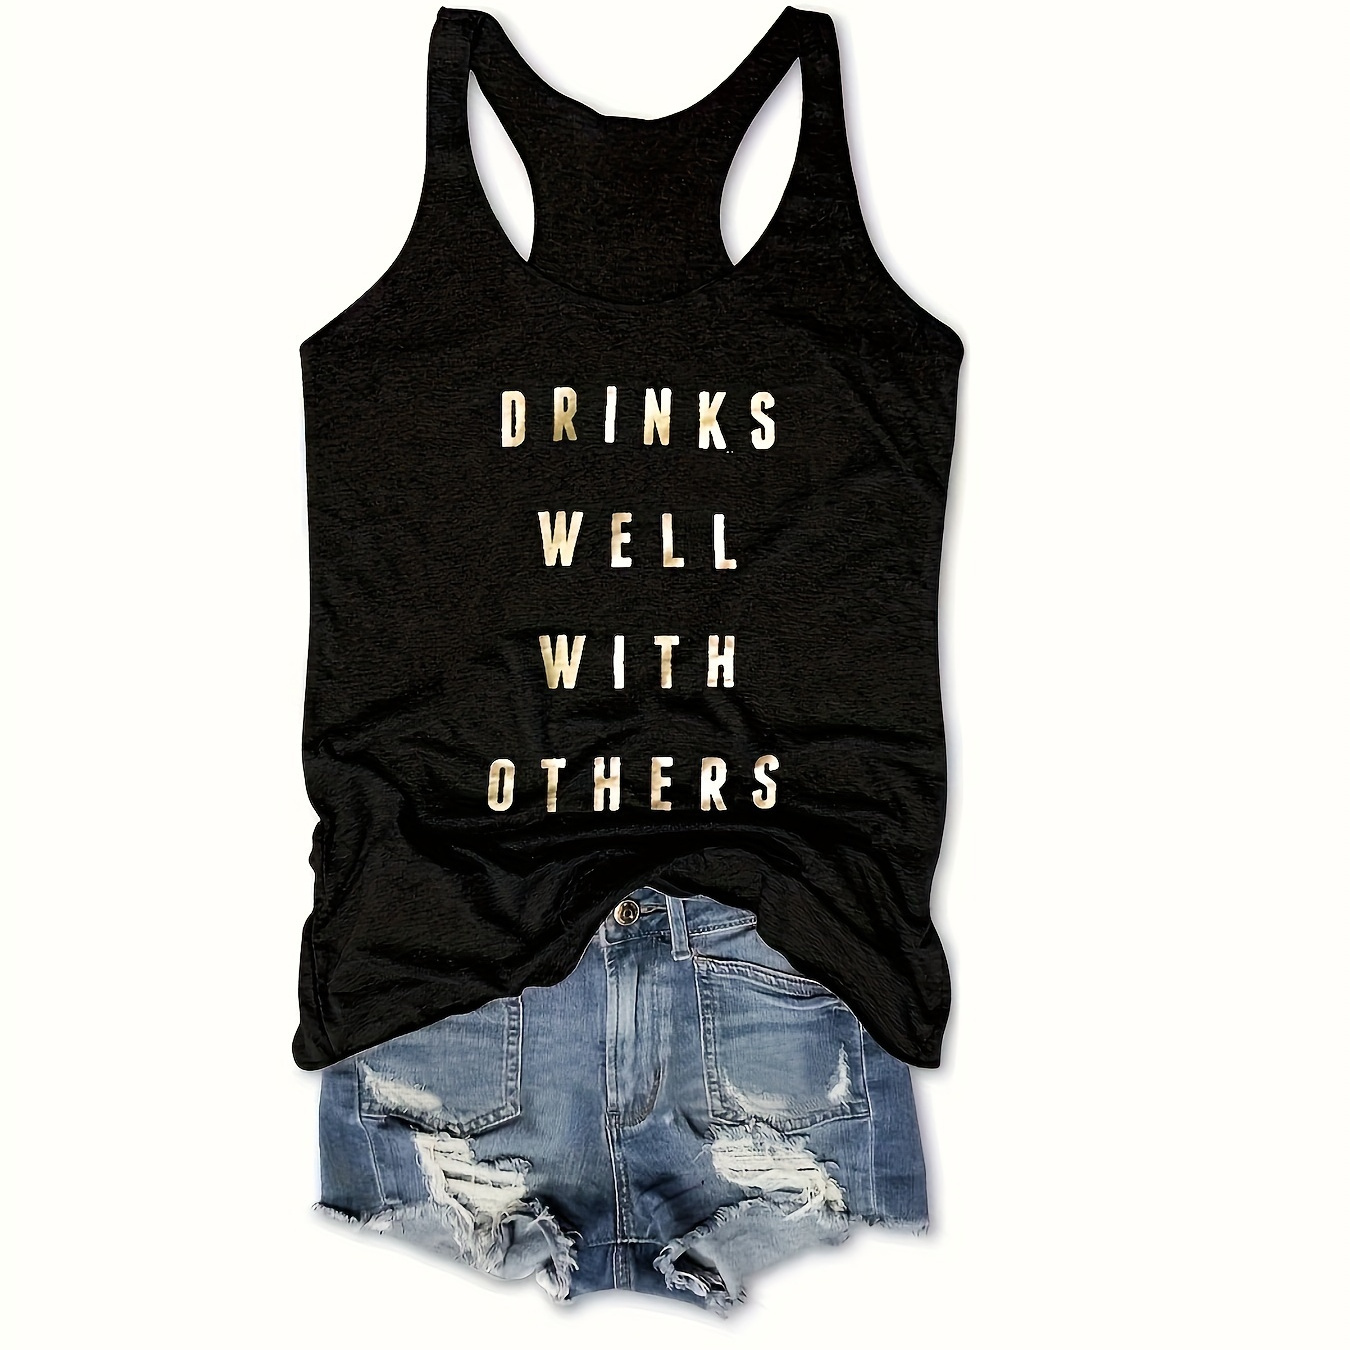 

Drinks Well Letter Print Tank Top, Sleeveless Casual Top For Summer & Spring, Women's Clothing